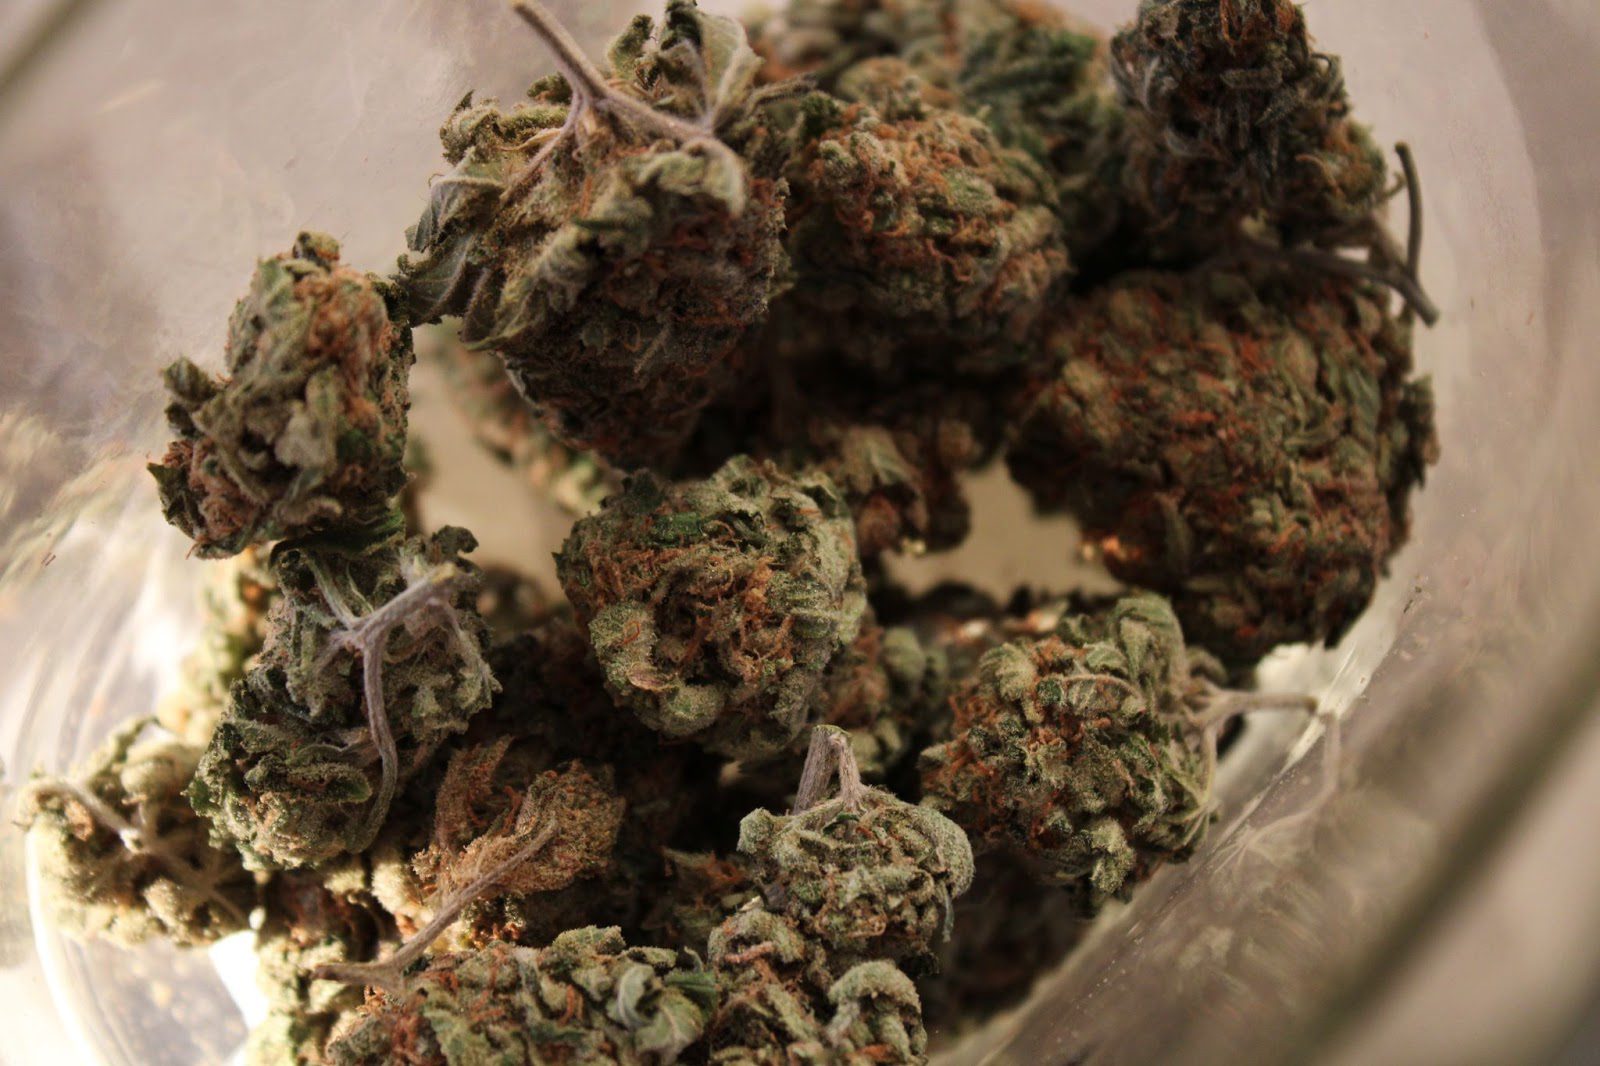 How Long Does Weed Last? 4 Ways To Keep Your Weed Fresh